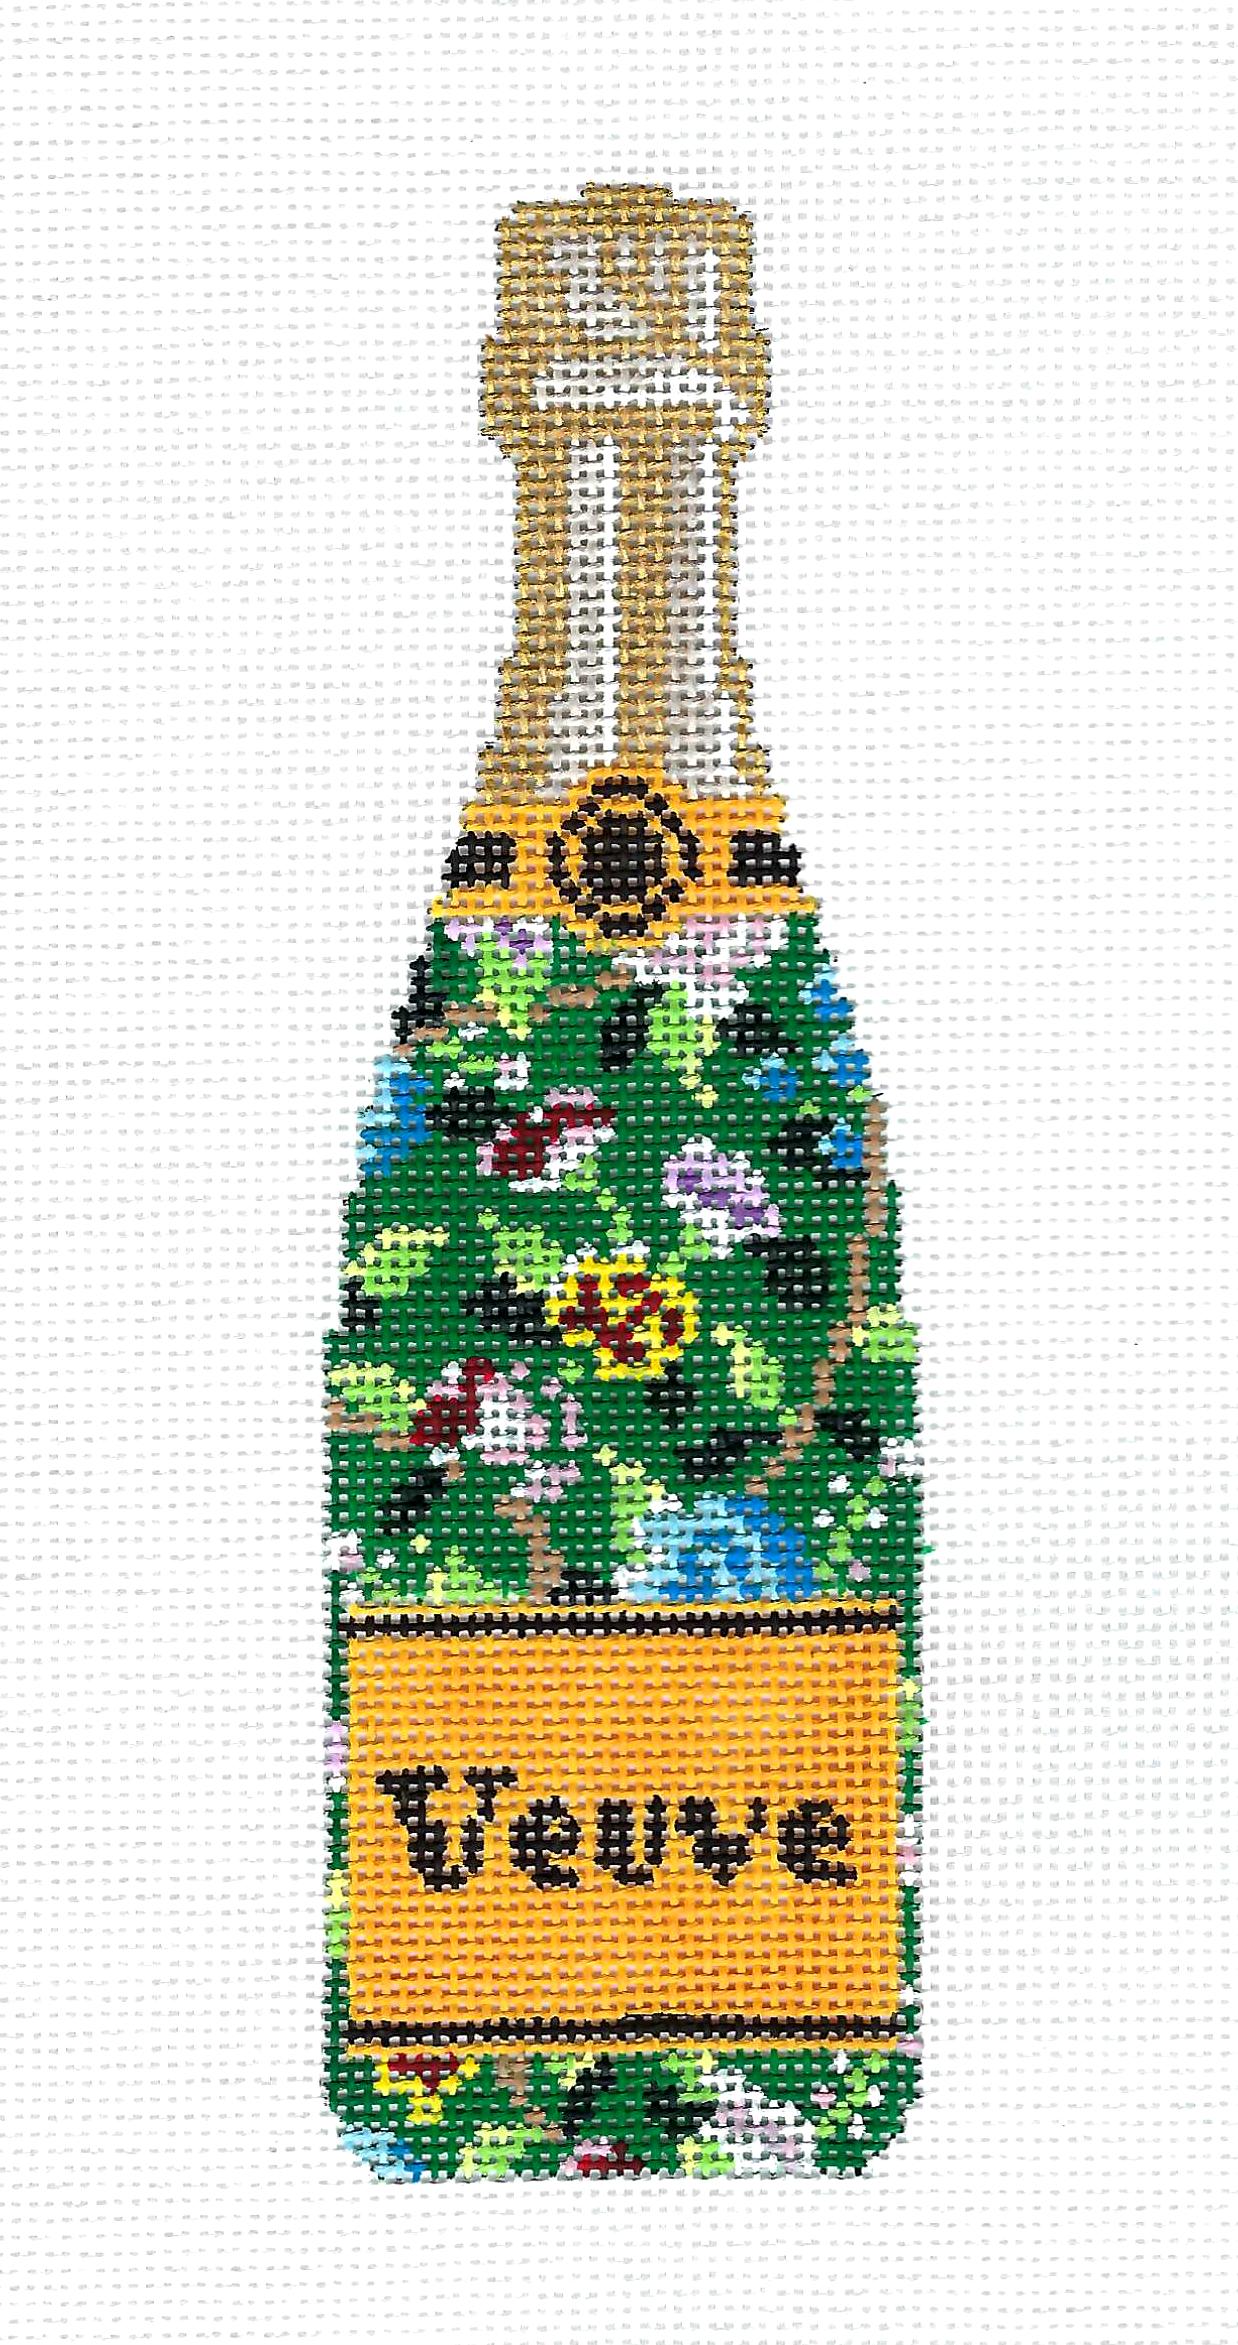 "Veuve" Champagne Bottle in Green Floral Design handpainted Needlepoint Canvas by C'ate La Vie